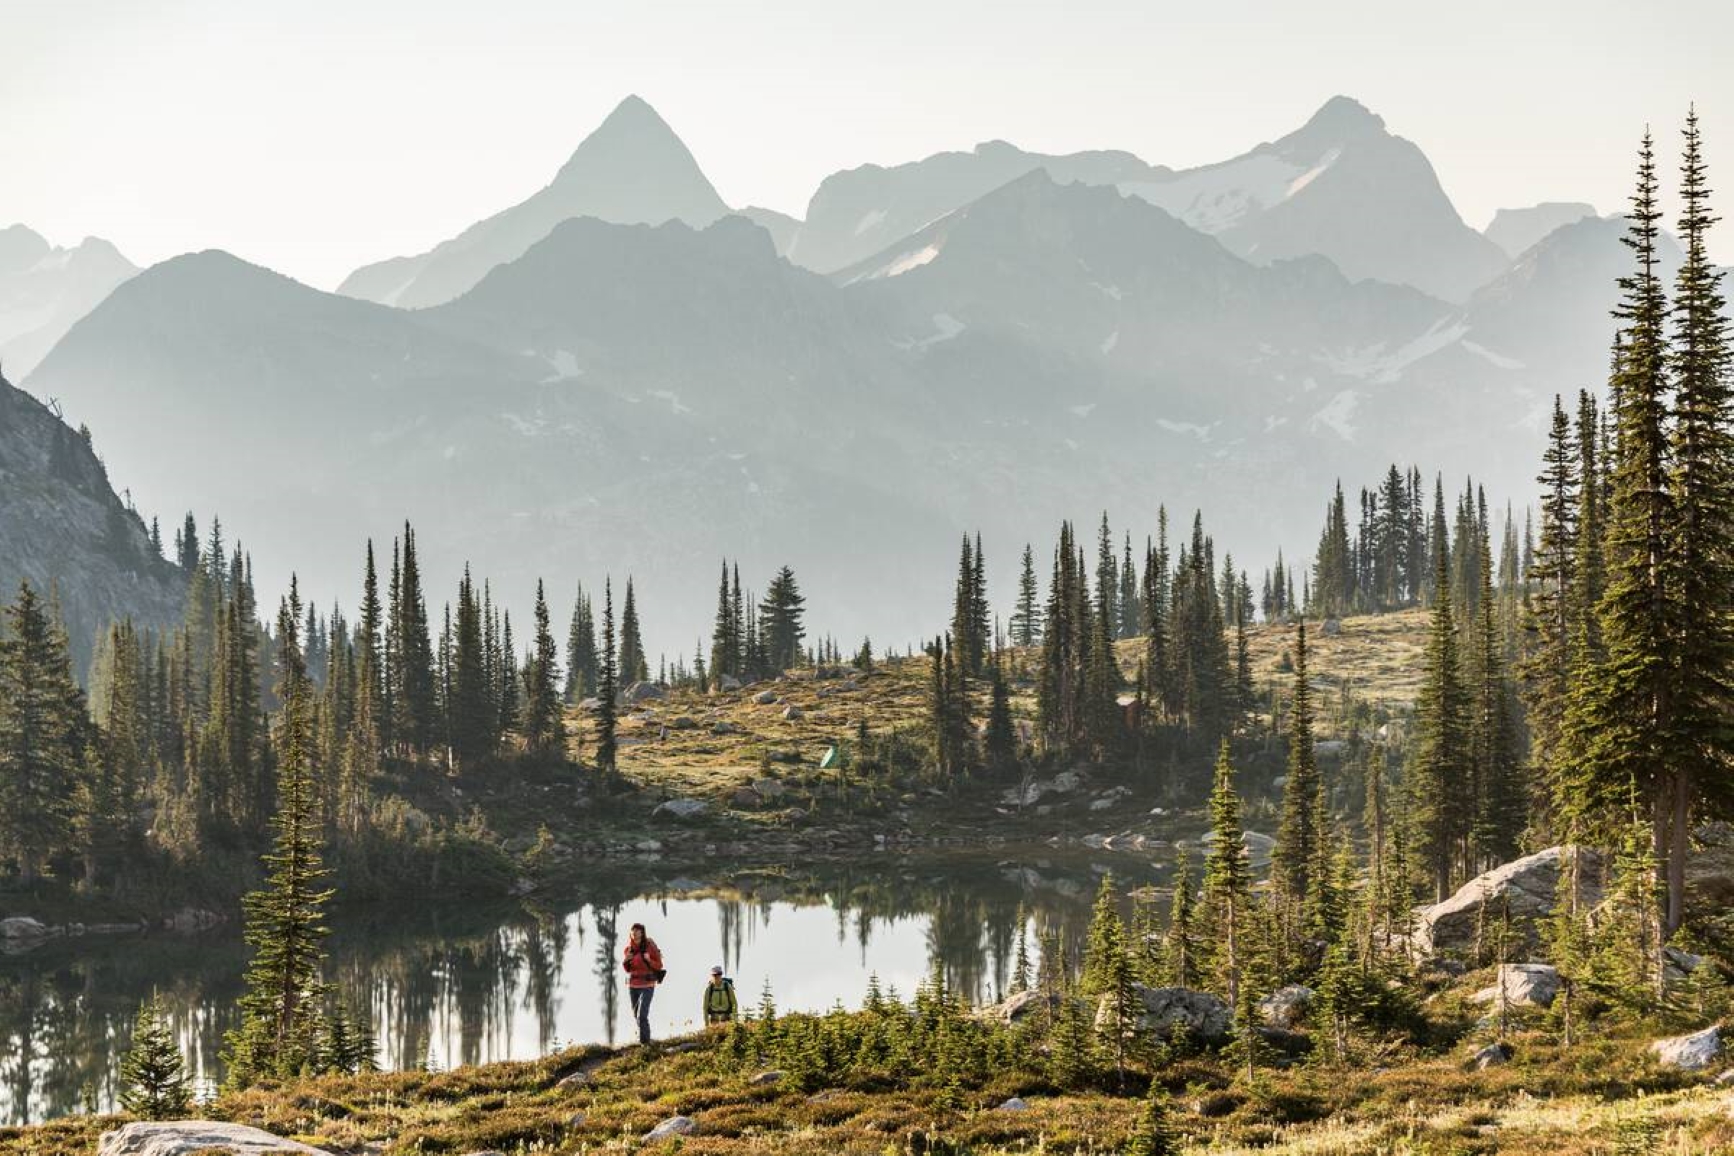 Two park visitors are exploring their surroundings. They are near a small lake that is surrounded by the forest and mountains in the distance. Photo credit: Destination BC